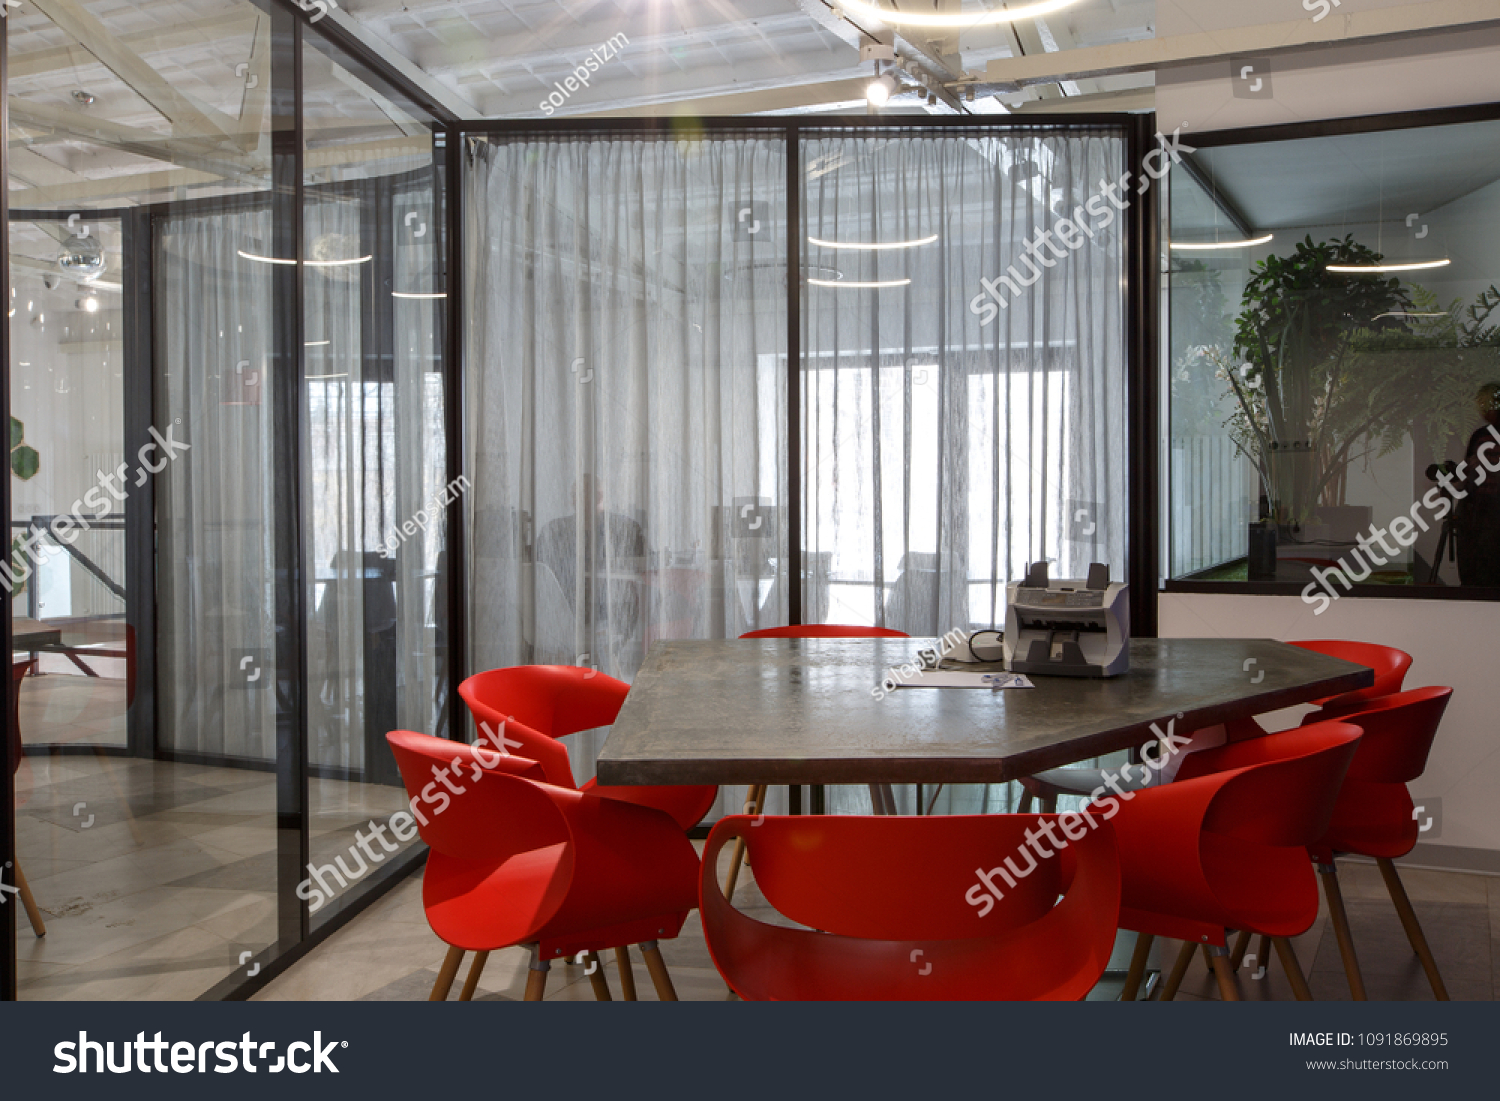 Brand new designed office interior in hi tech stile. Many steel, glass and natural wood elements, white walls and ceilings.  #1091869895